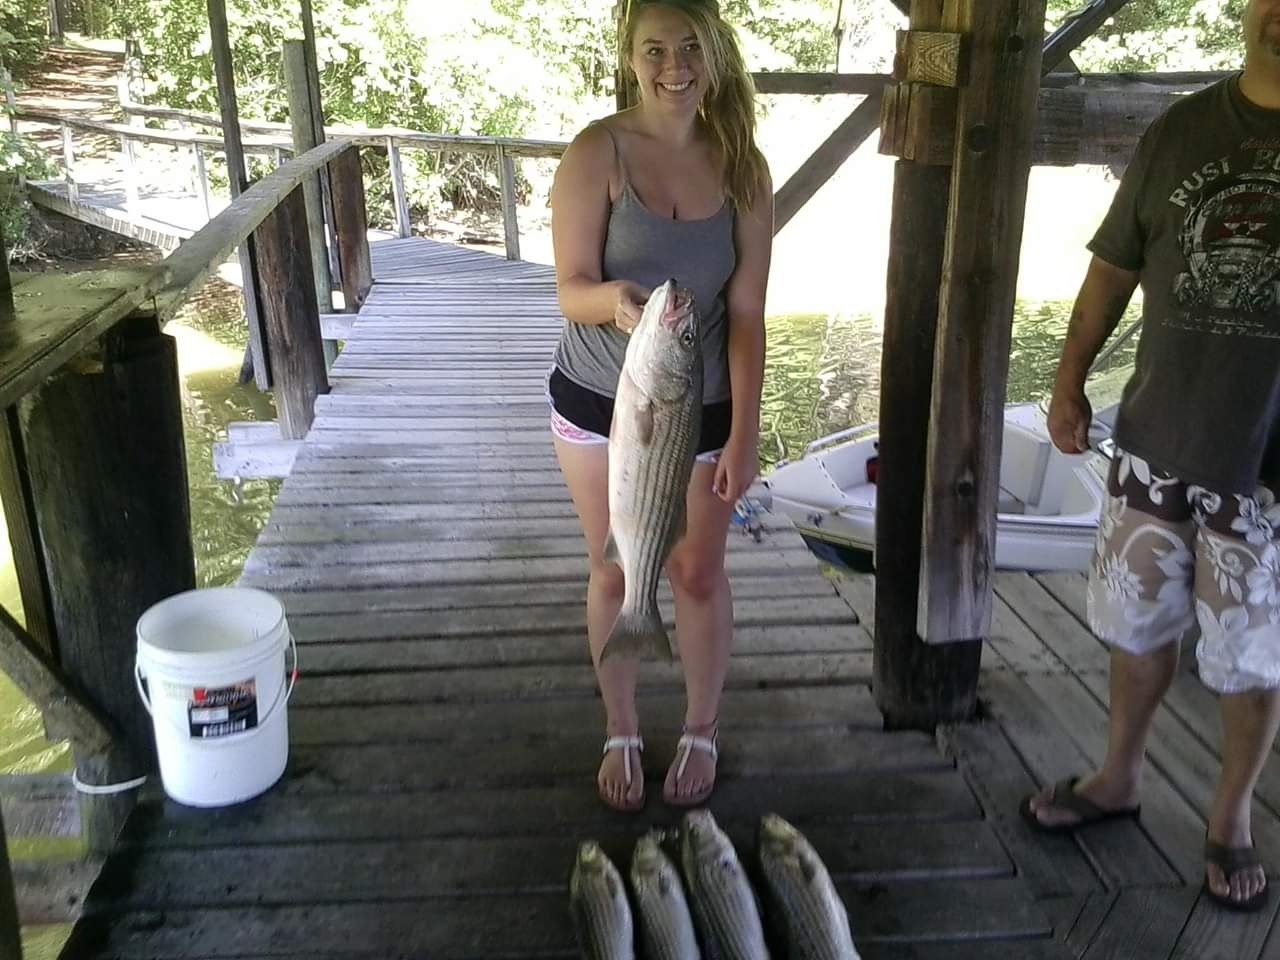 Woman smiles while holding up her caught fish on the dock